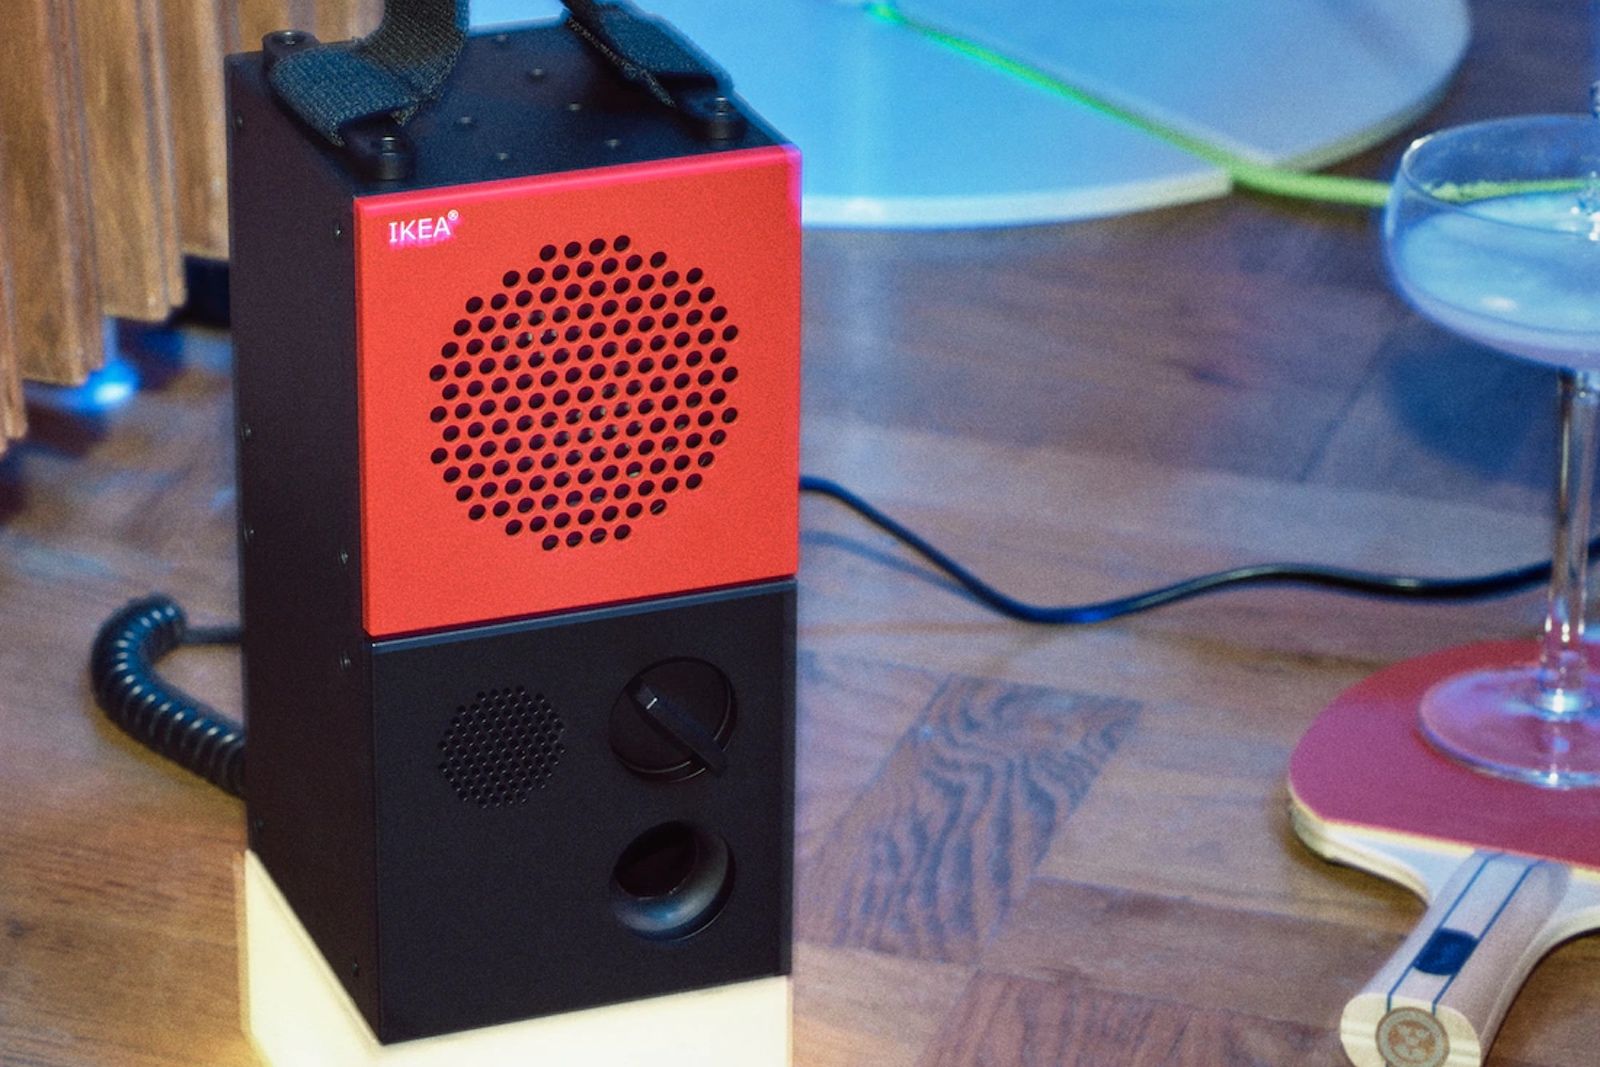 Ikea launches a new party speaker range with Teenage Engineering image 1